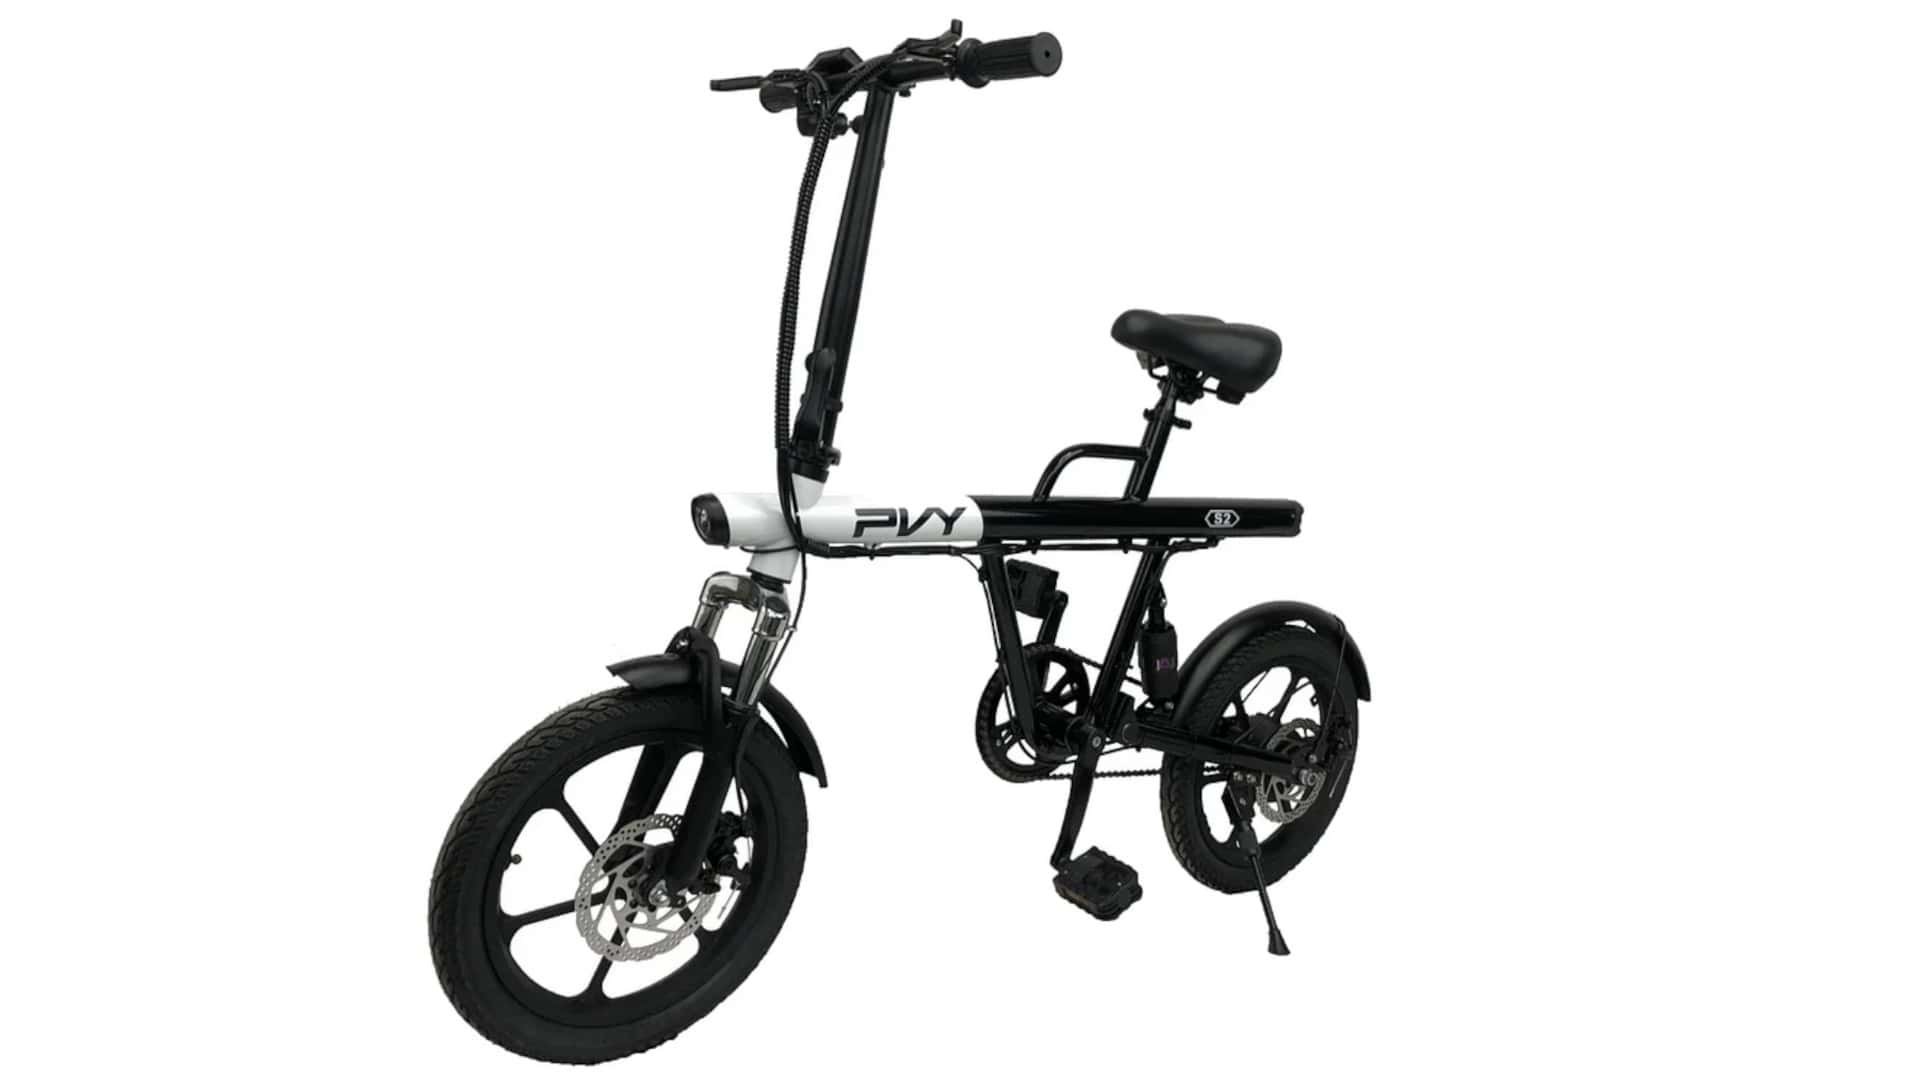 new pvy s2 e-bike offers compact and convenient urban mobility